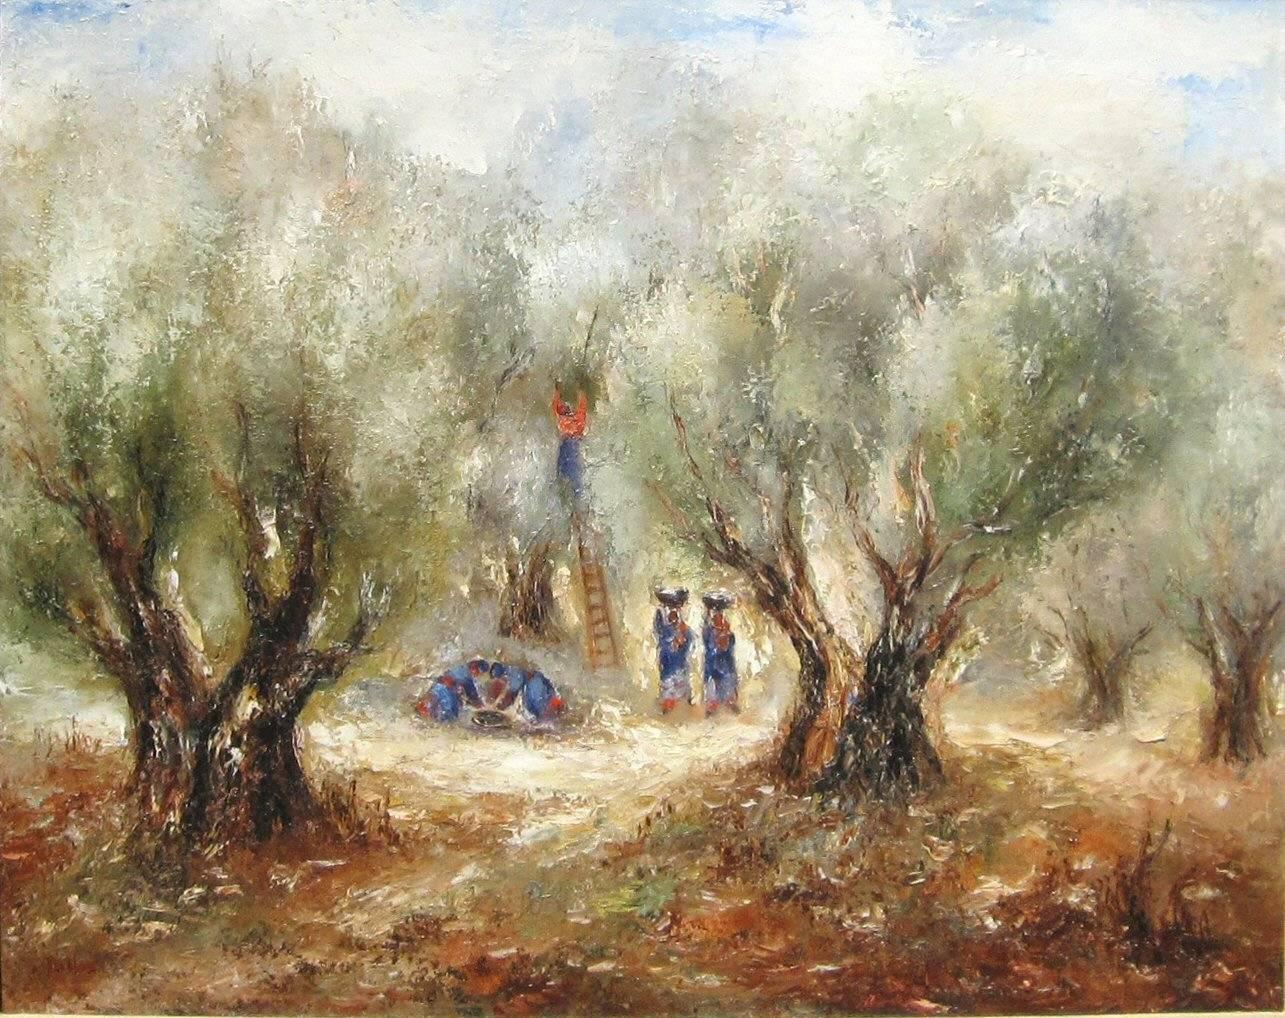 Reuven Rubin Figurative Painting - Picking the Olives by REUVEN RUBIN - 20th century art, oil painting